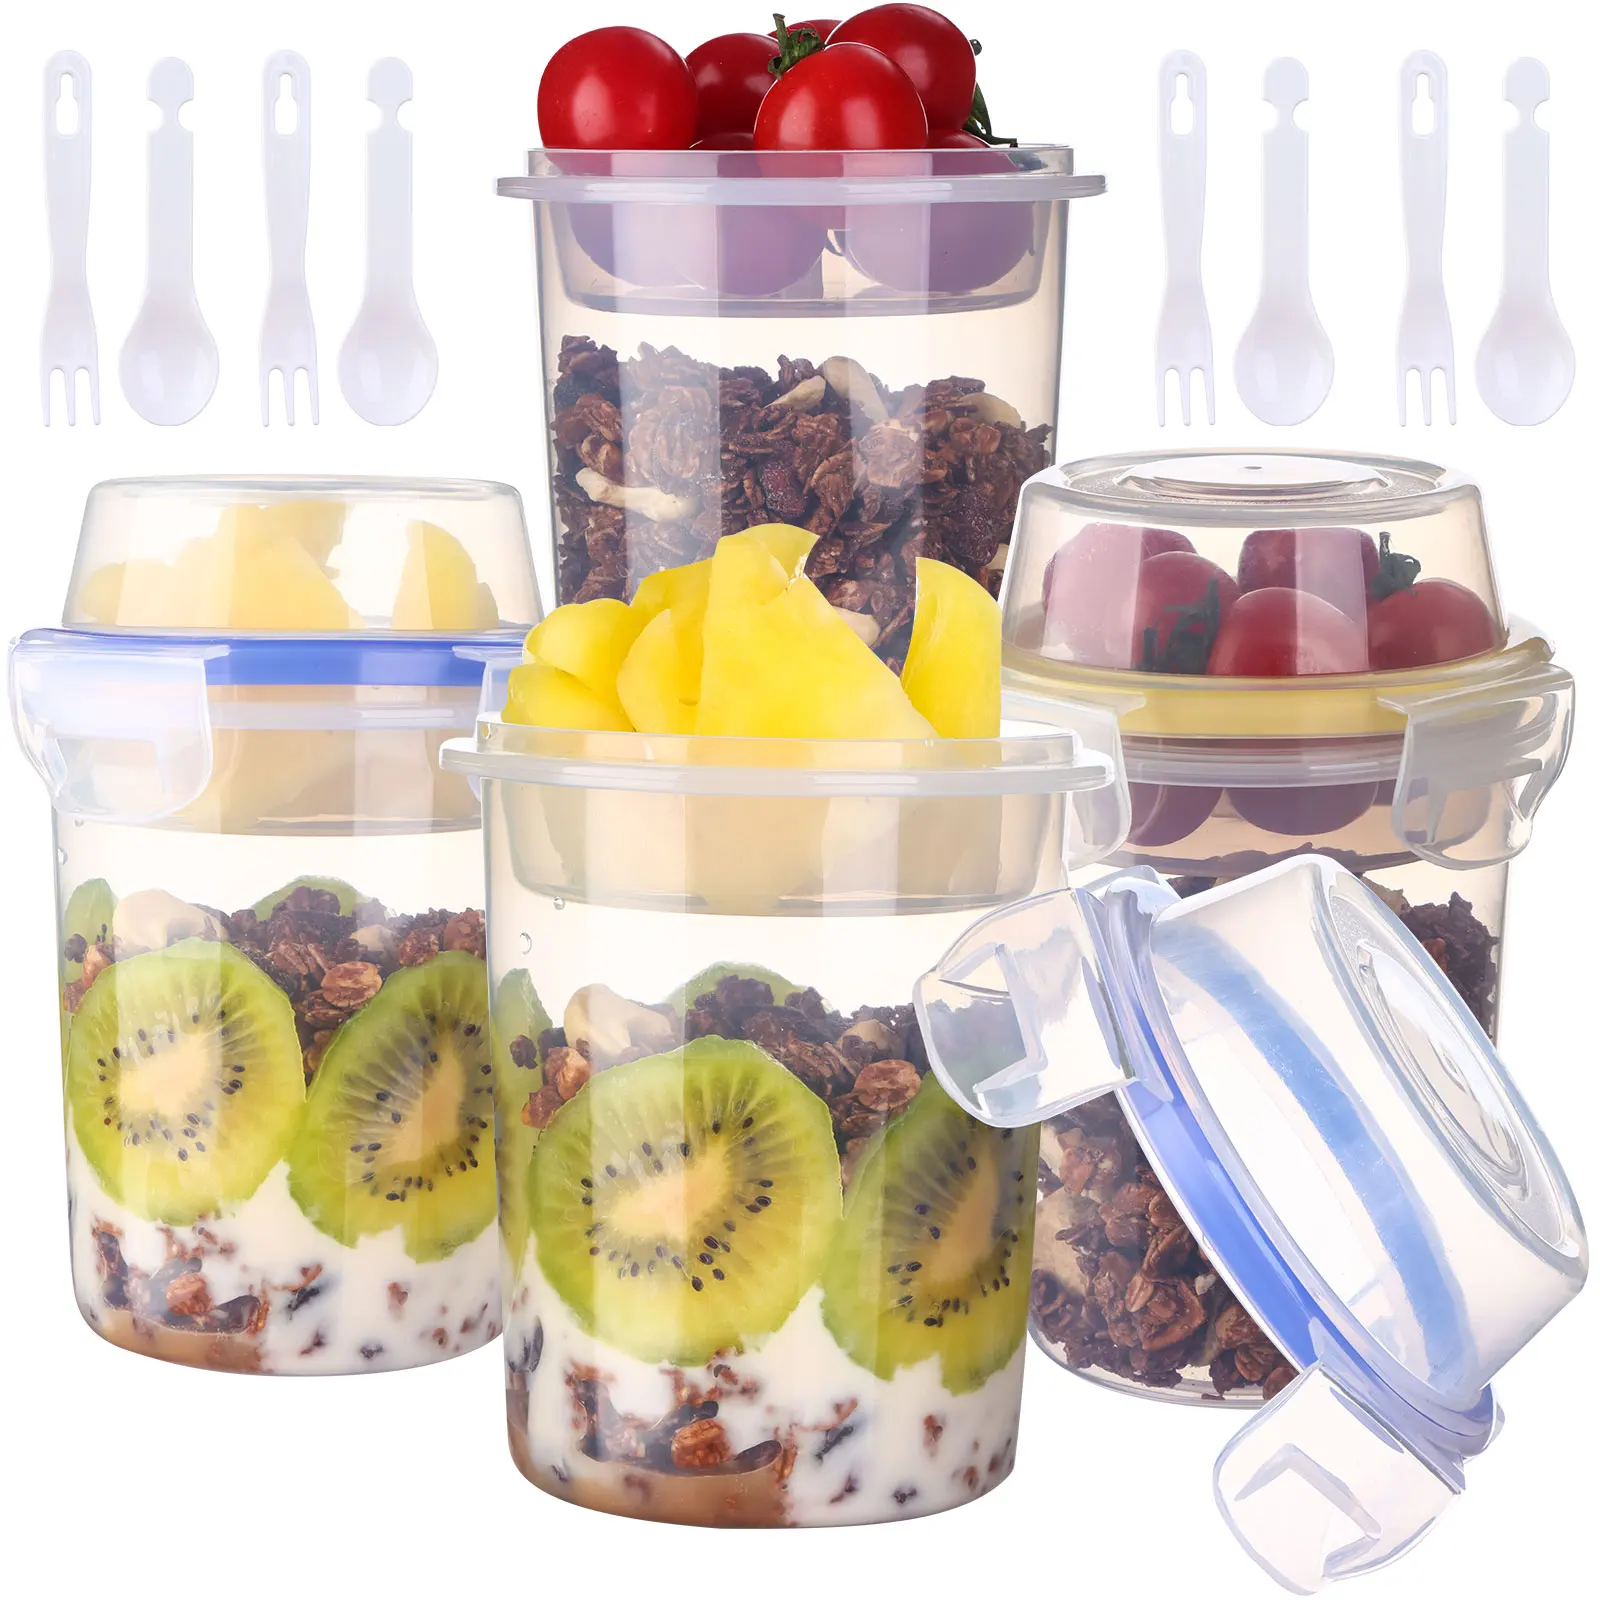 

4 Packs 17 oz Overnight Oats Containers with Lids and Spoons Oatmeal Jars with lids Breakfast On the Go Cups Yogurt Parfait Cont